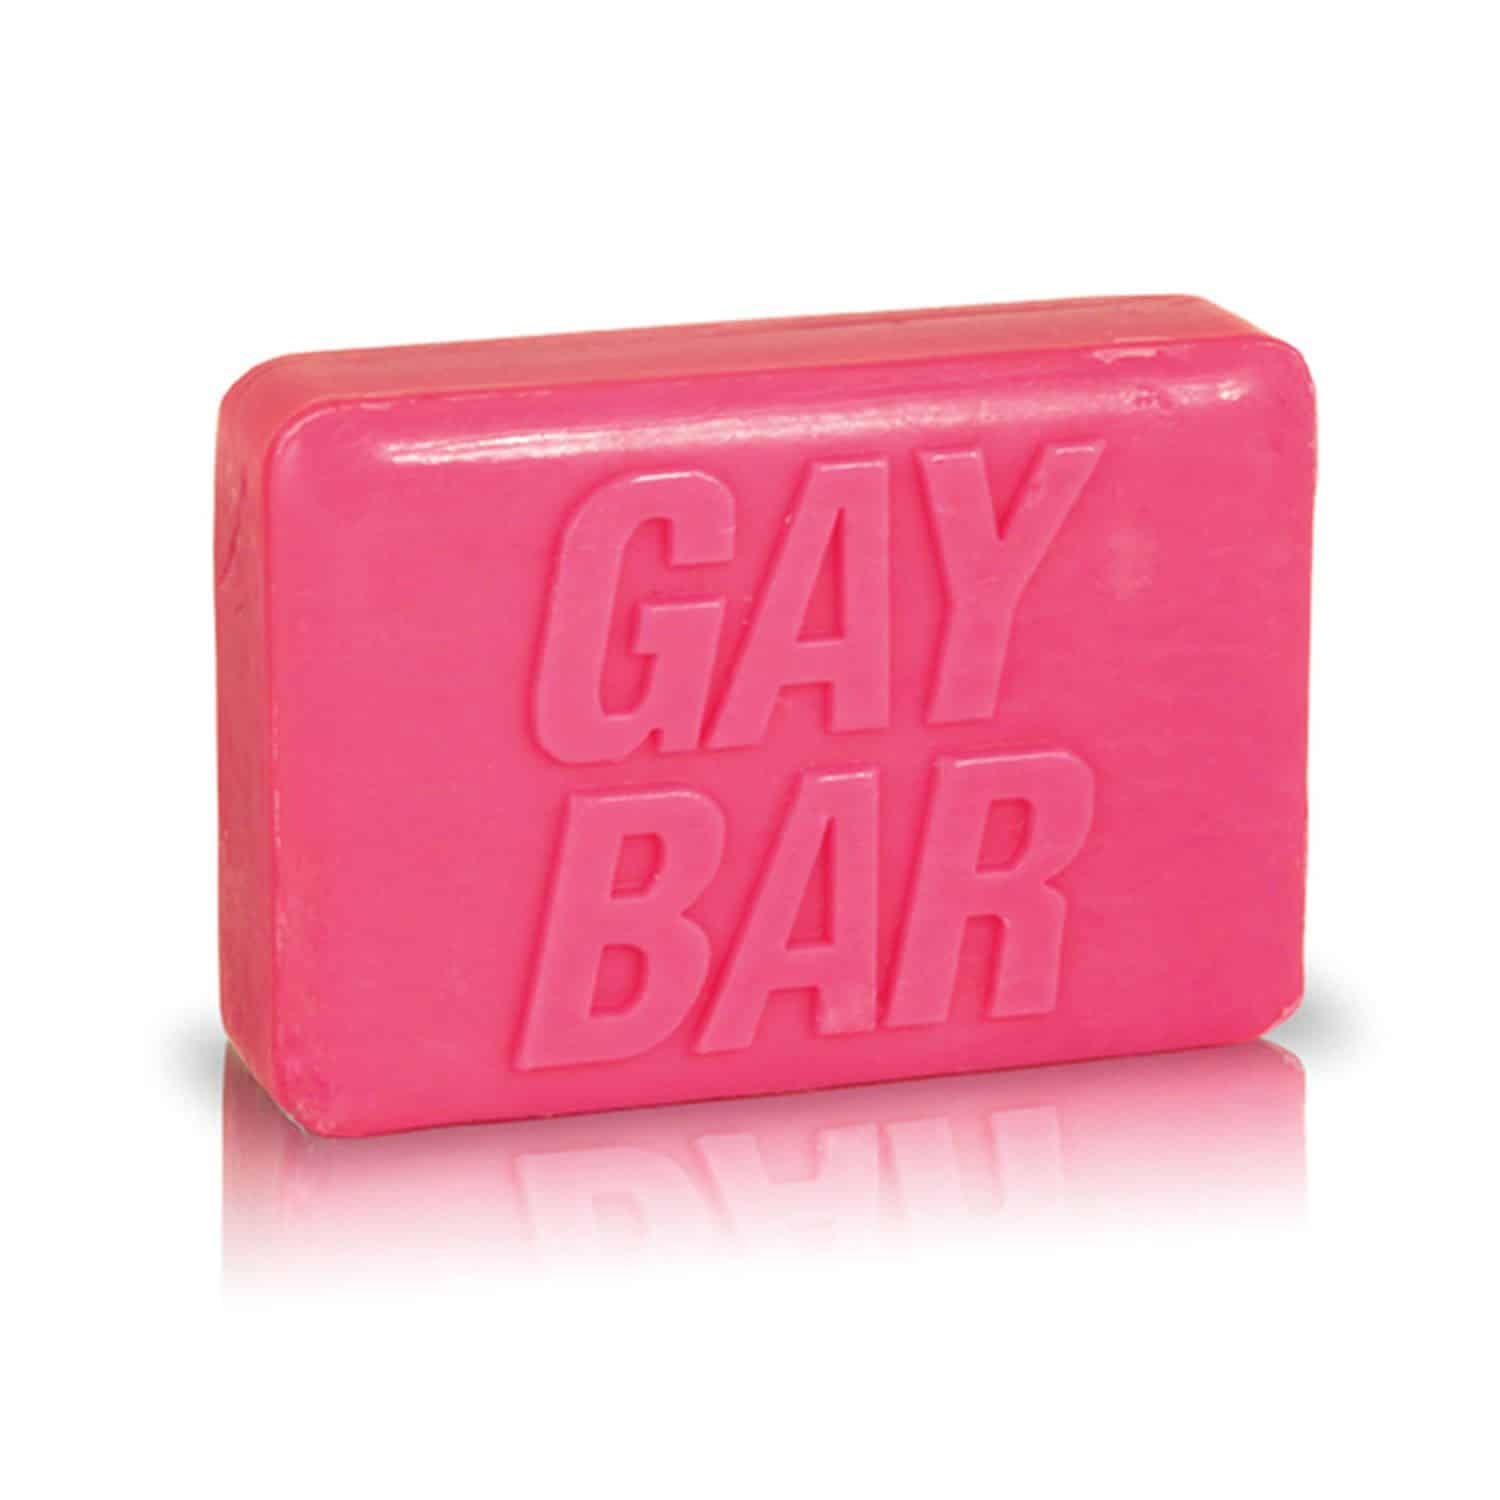 Spinning Hat Gay Bar Soap Funny Gift to Buy